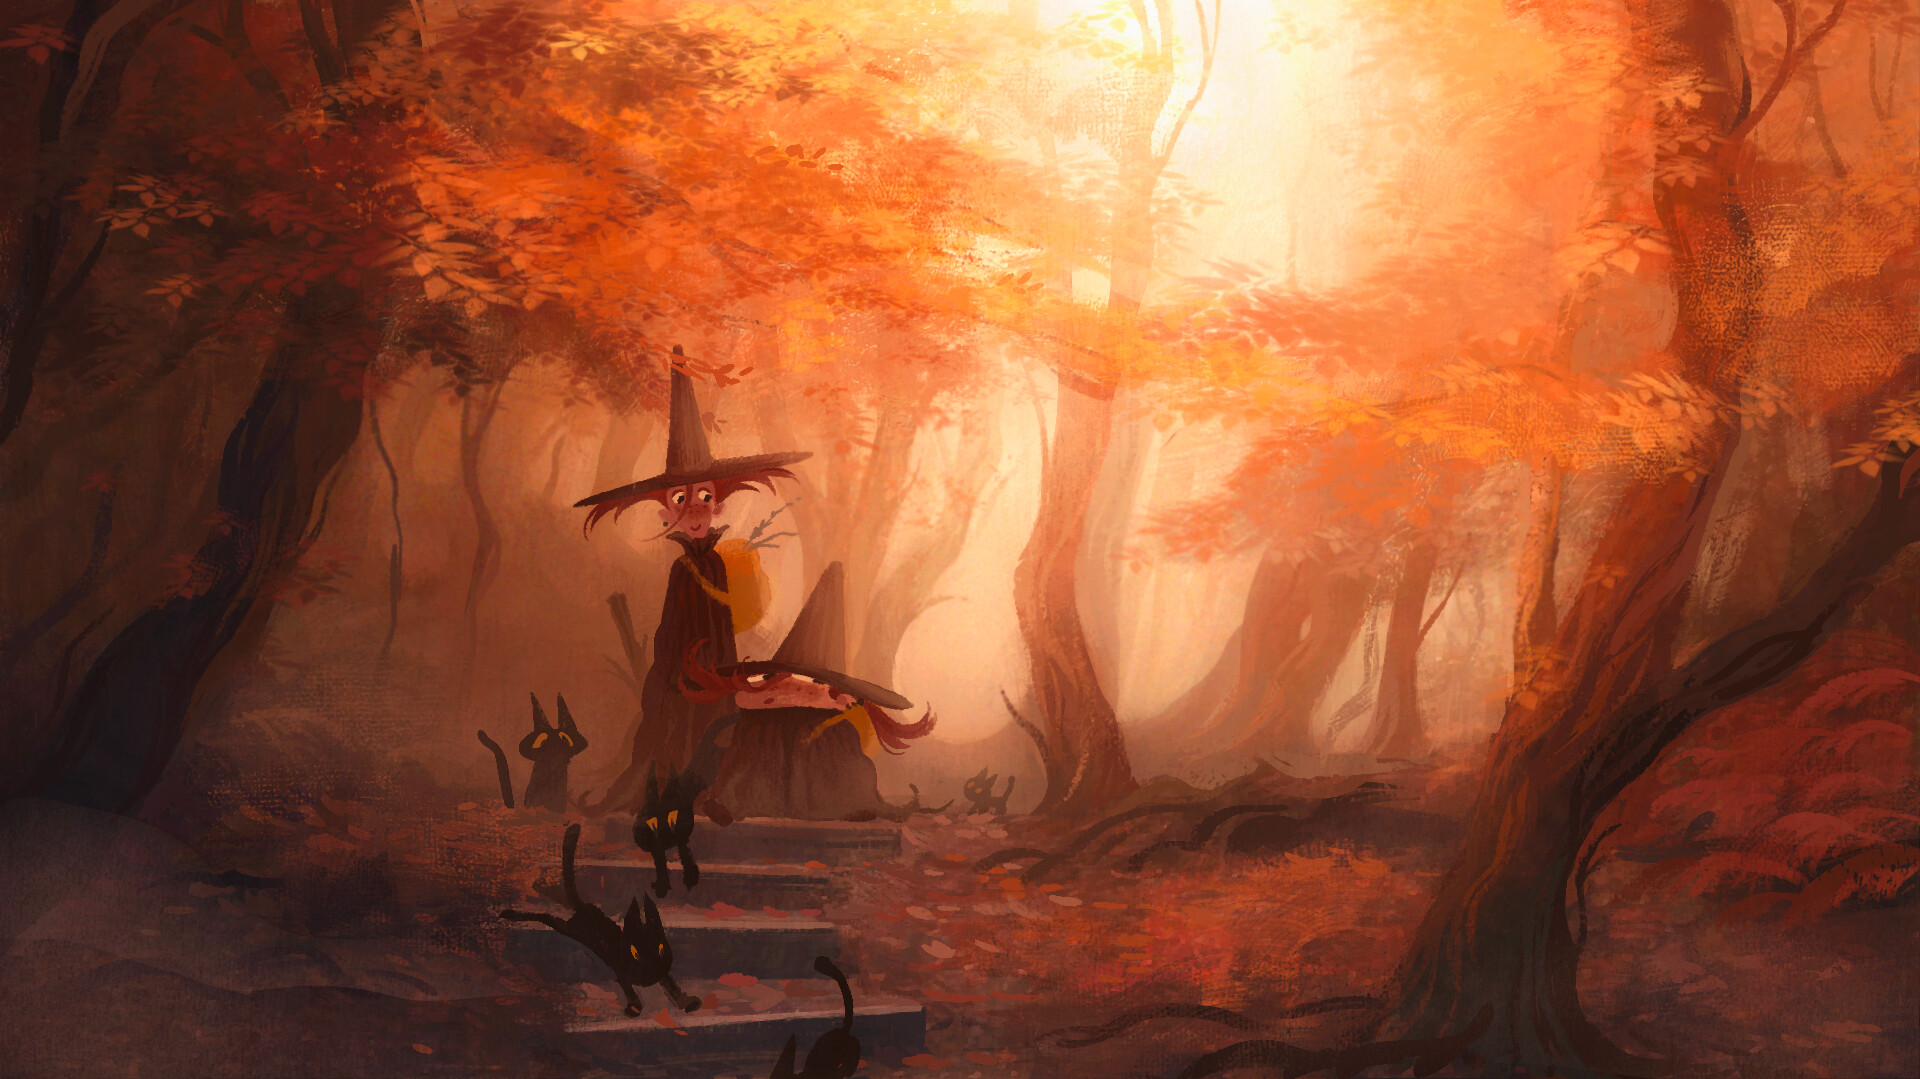 ArtStation - Witches coming home - concept art